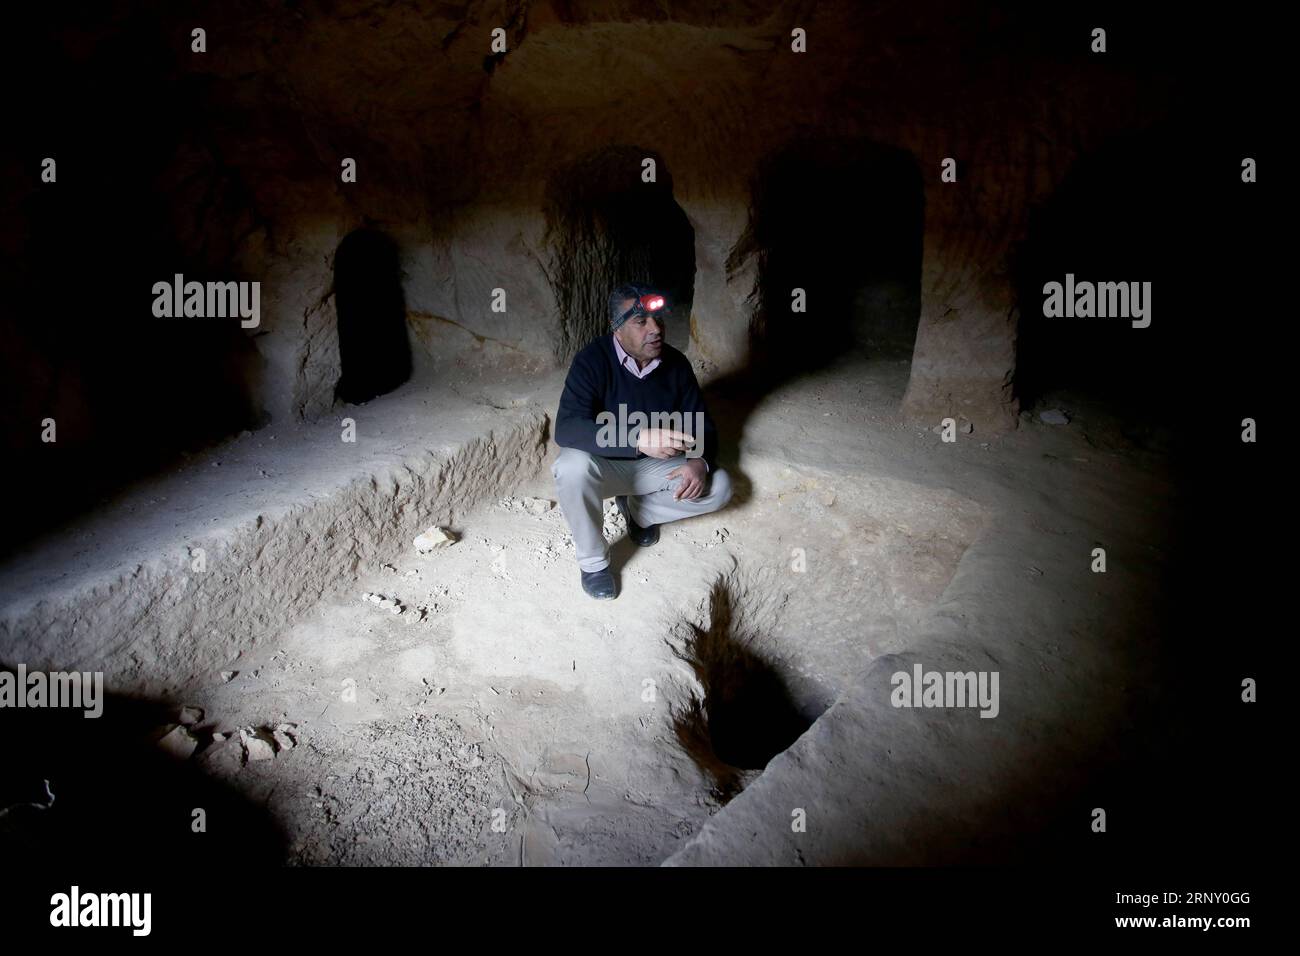 (180219) -- NABLUS, Feb. 19, 2018 -- Palestinian engineer Mahmoud Biraoui inspects a newly-discovered cemetery in the West Bank city of Nablus, on Feb. 19, 2018. Palestinian Ministry of Tourism and Antiquities said Friday it has uncovered a new historical cemetery that belongs to the Byzantine era near the West Bank city of Nablus.) (srb) MIDEAST-NABLUS-ARCHAEOLOGY-CEMETERY NidalxEshtayeh PUBLICATIONxNOTxINxCHN Stock Photo